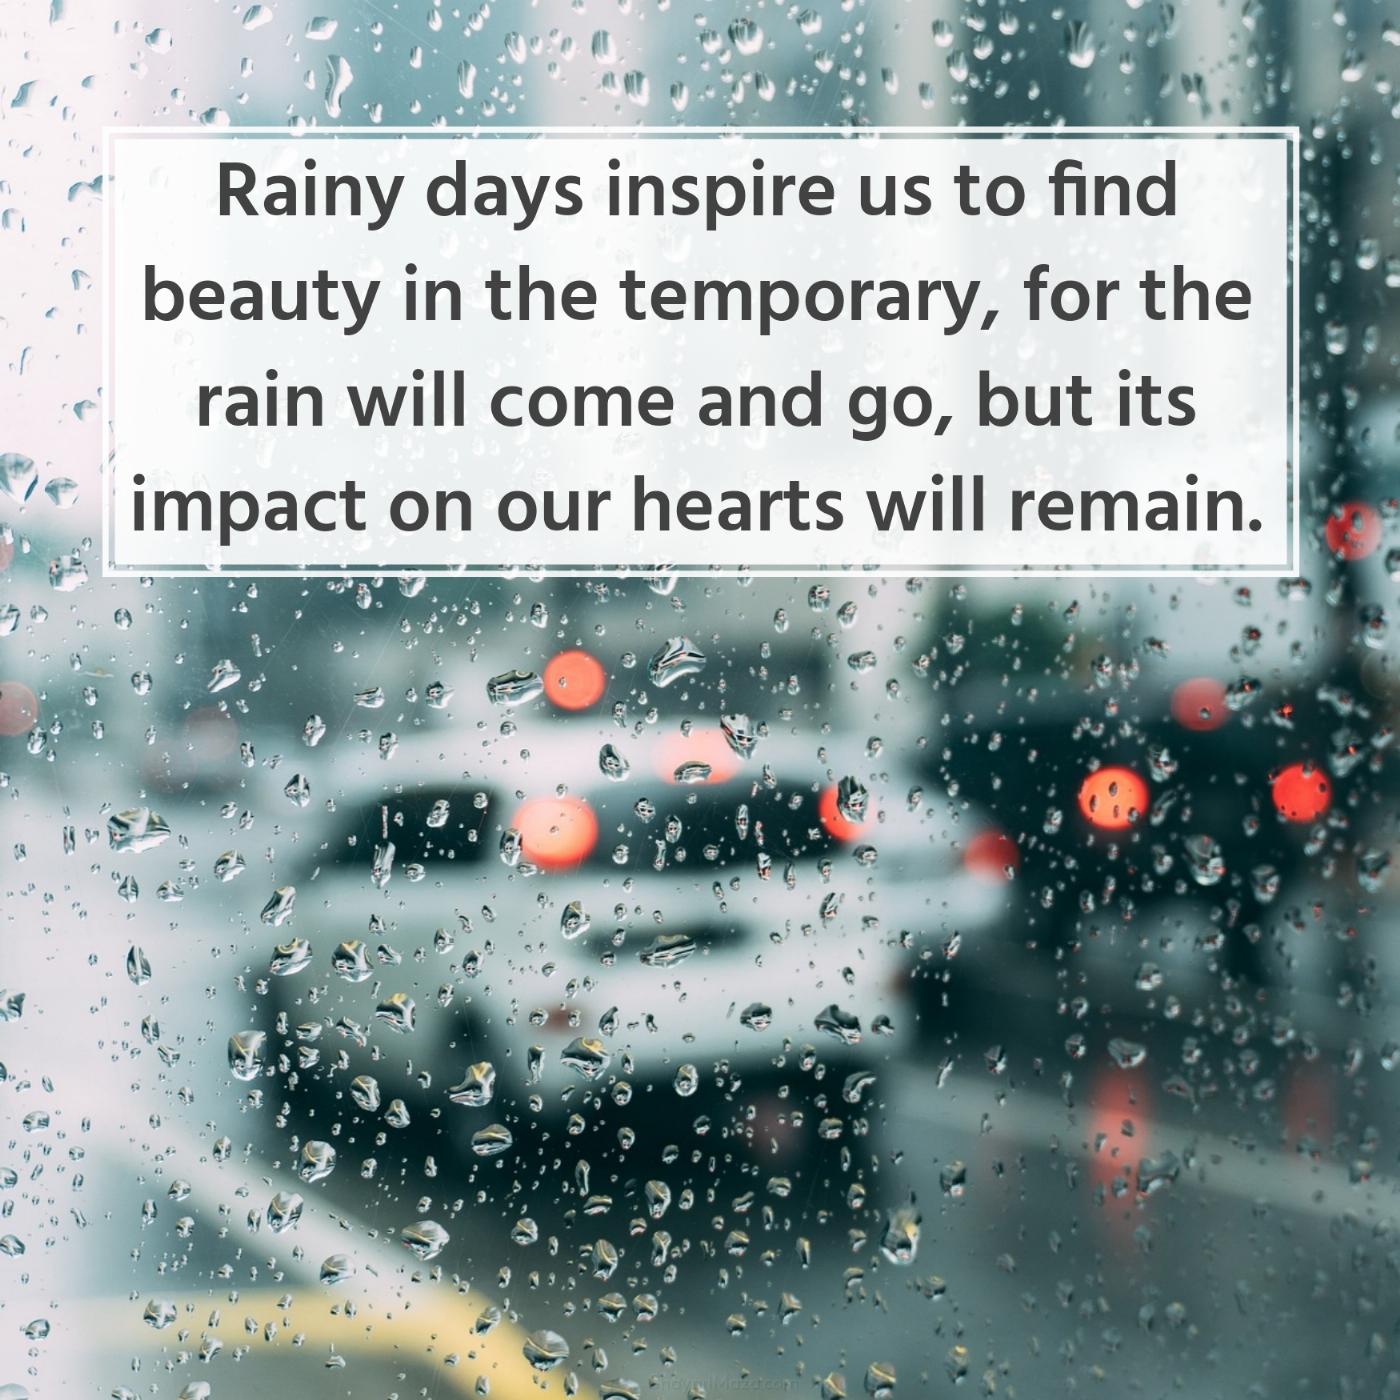 Rainy days inspire us to find beauty in the temporary